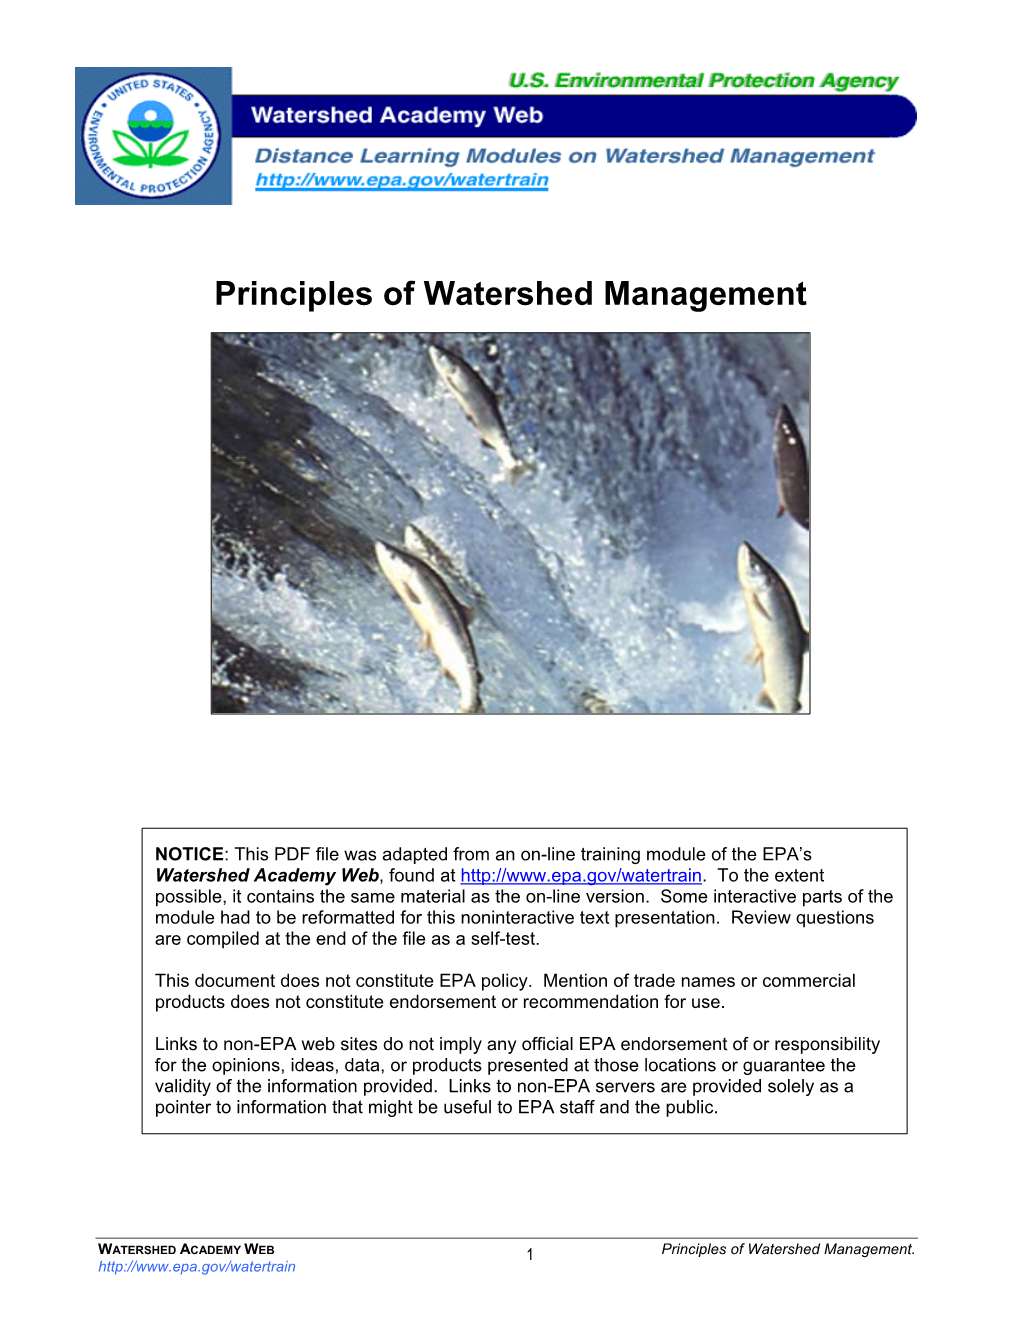 Principles of Watershed Management